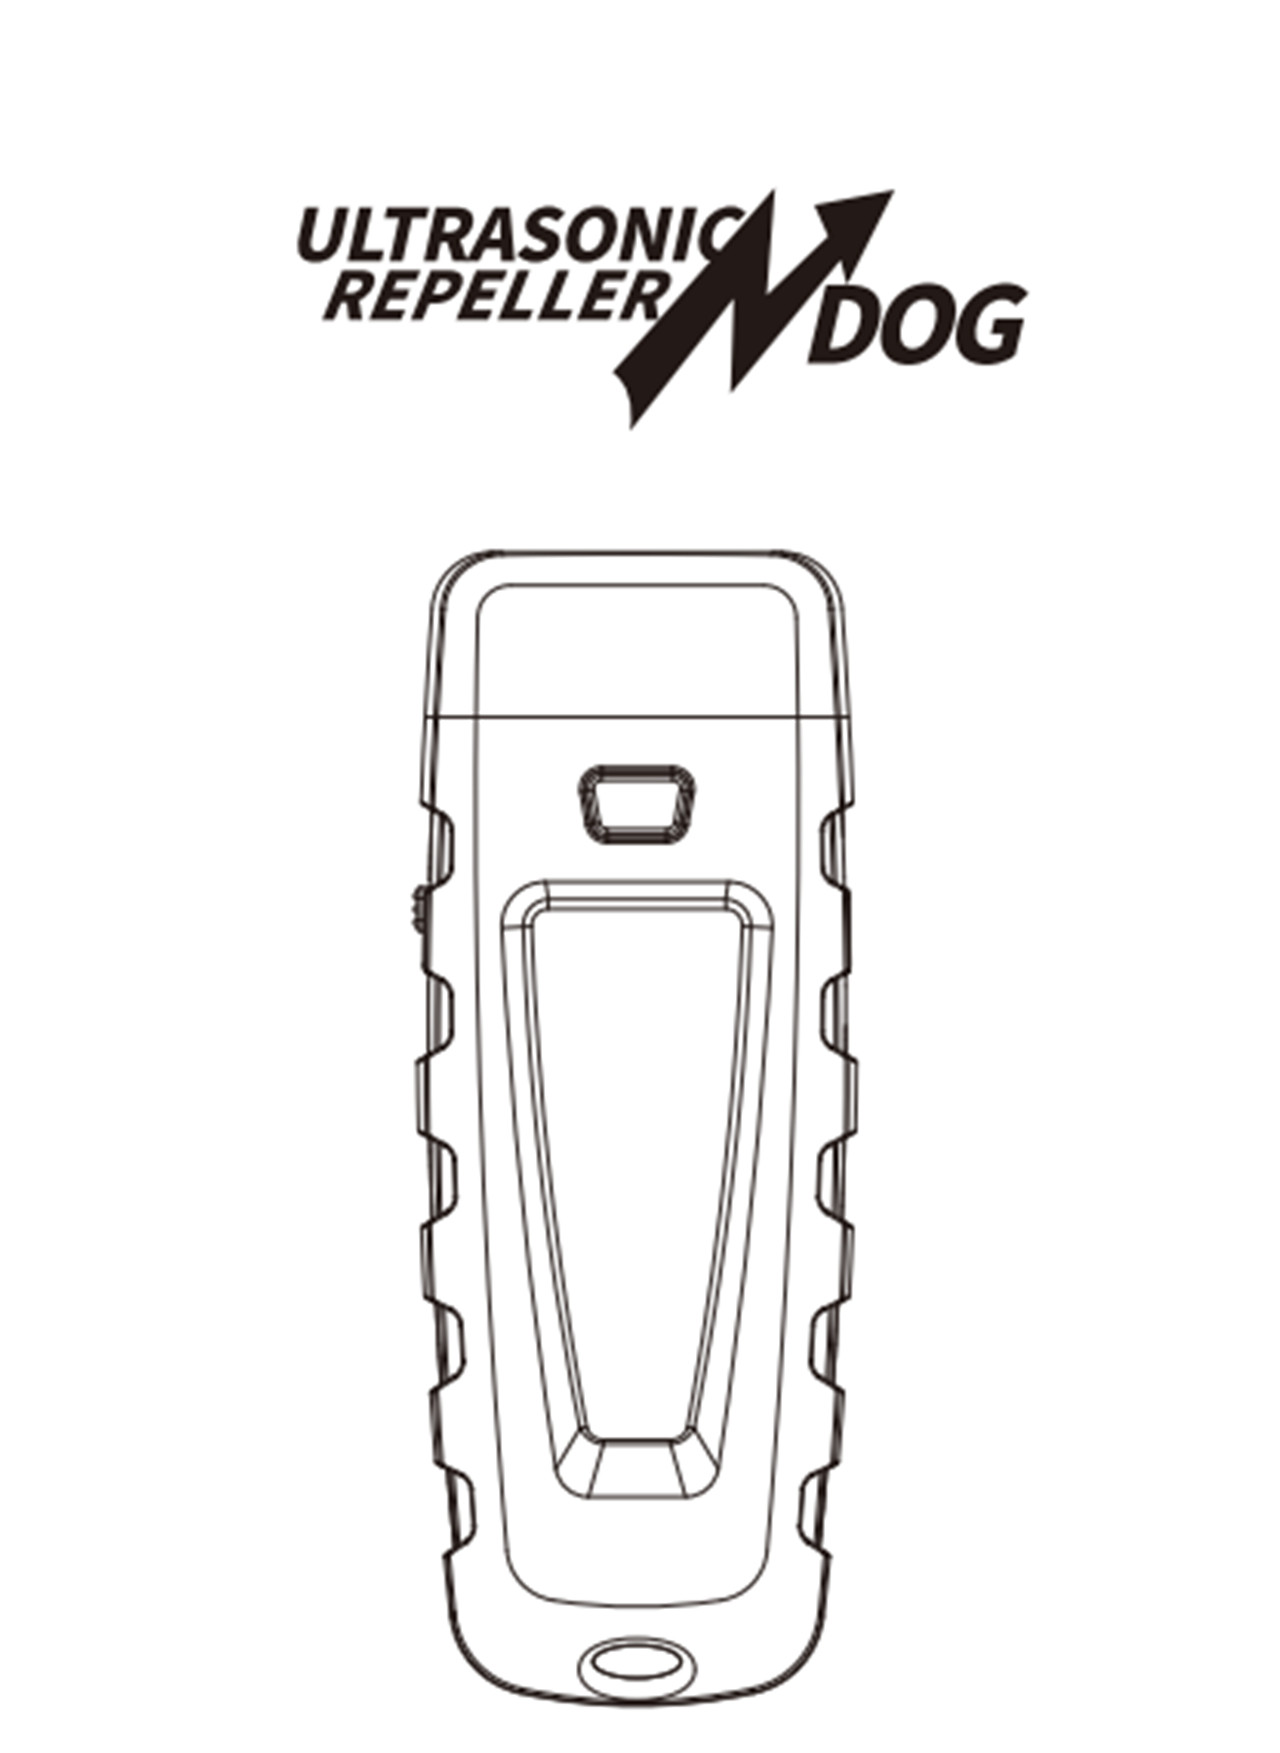 Dog Barking Control Devices01 (5)